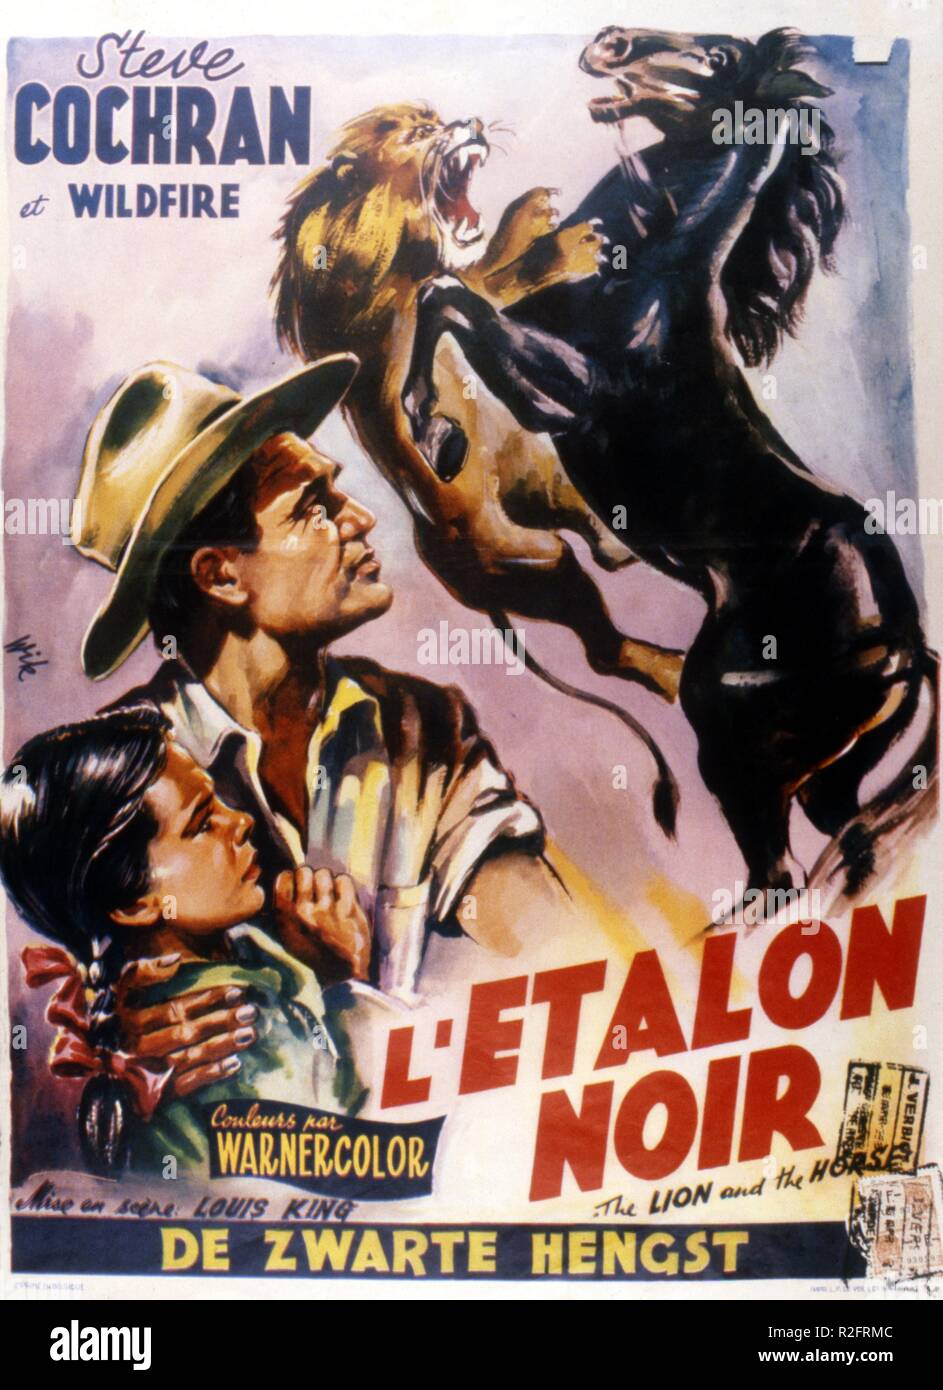 The Lion and the Horse Year : 1953 USA Director : Louis King Movie poster (Belgium) Stock Photo